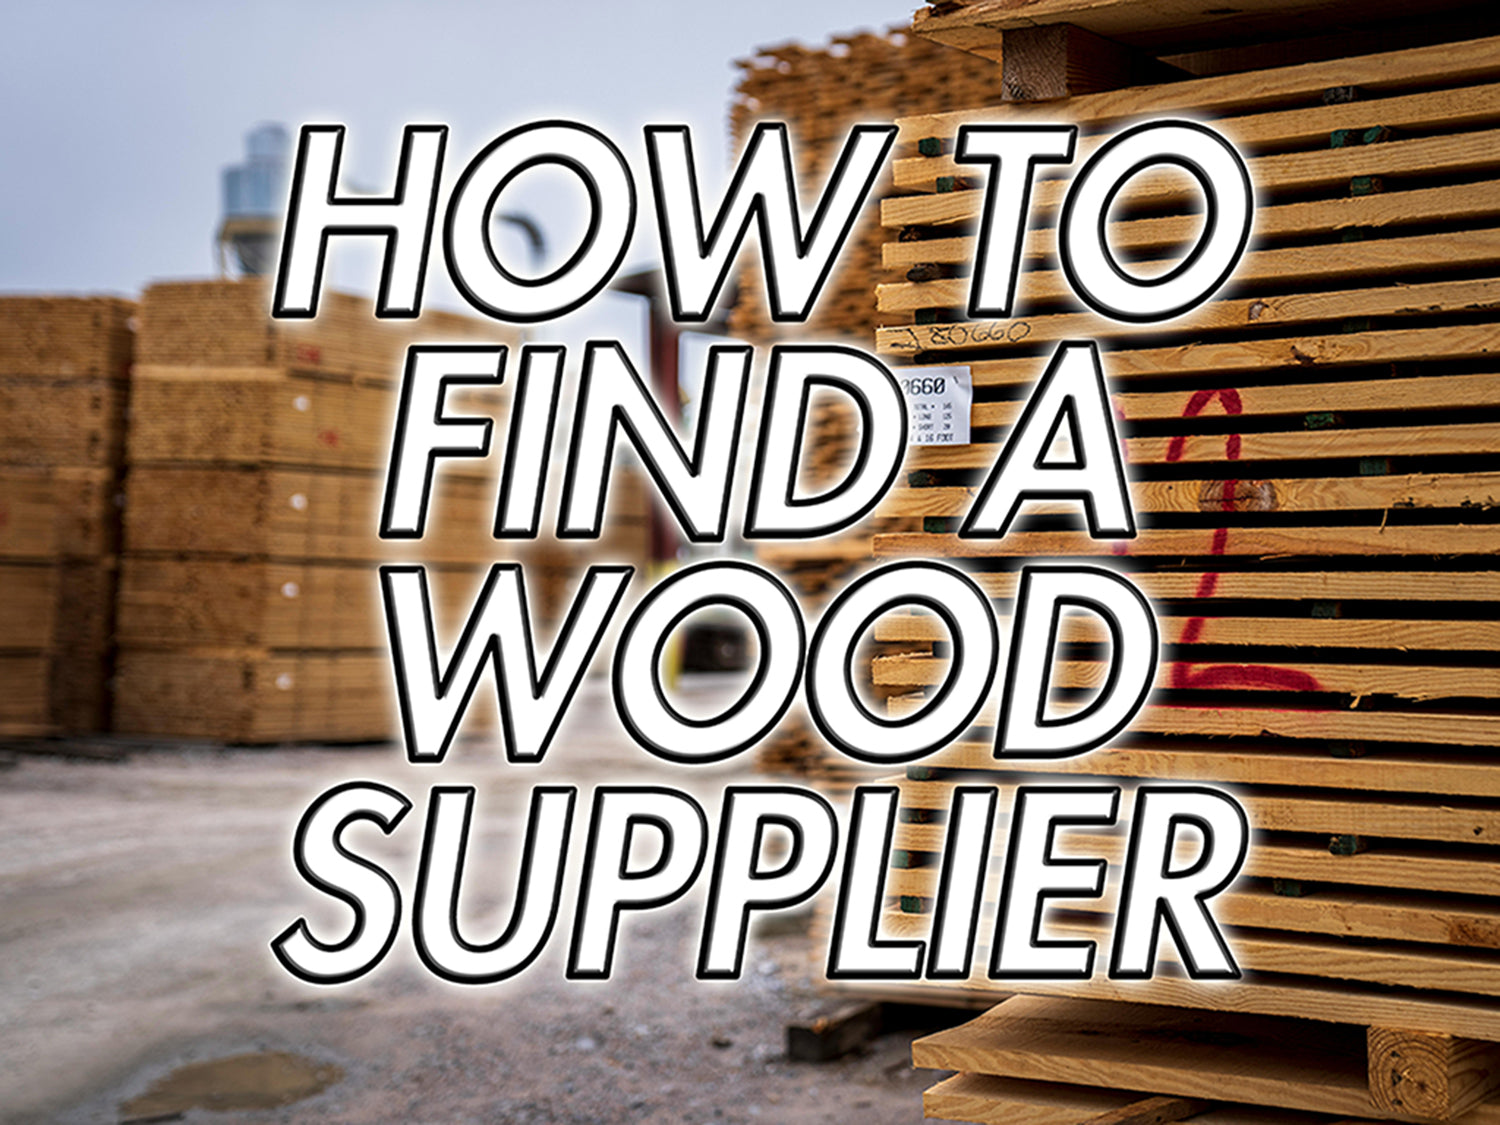 Finding the Perfect Wood Supplier for Your Needs